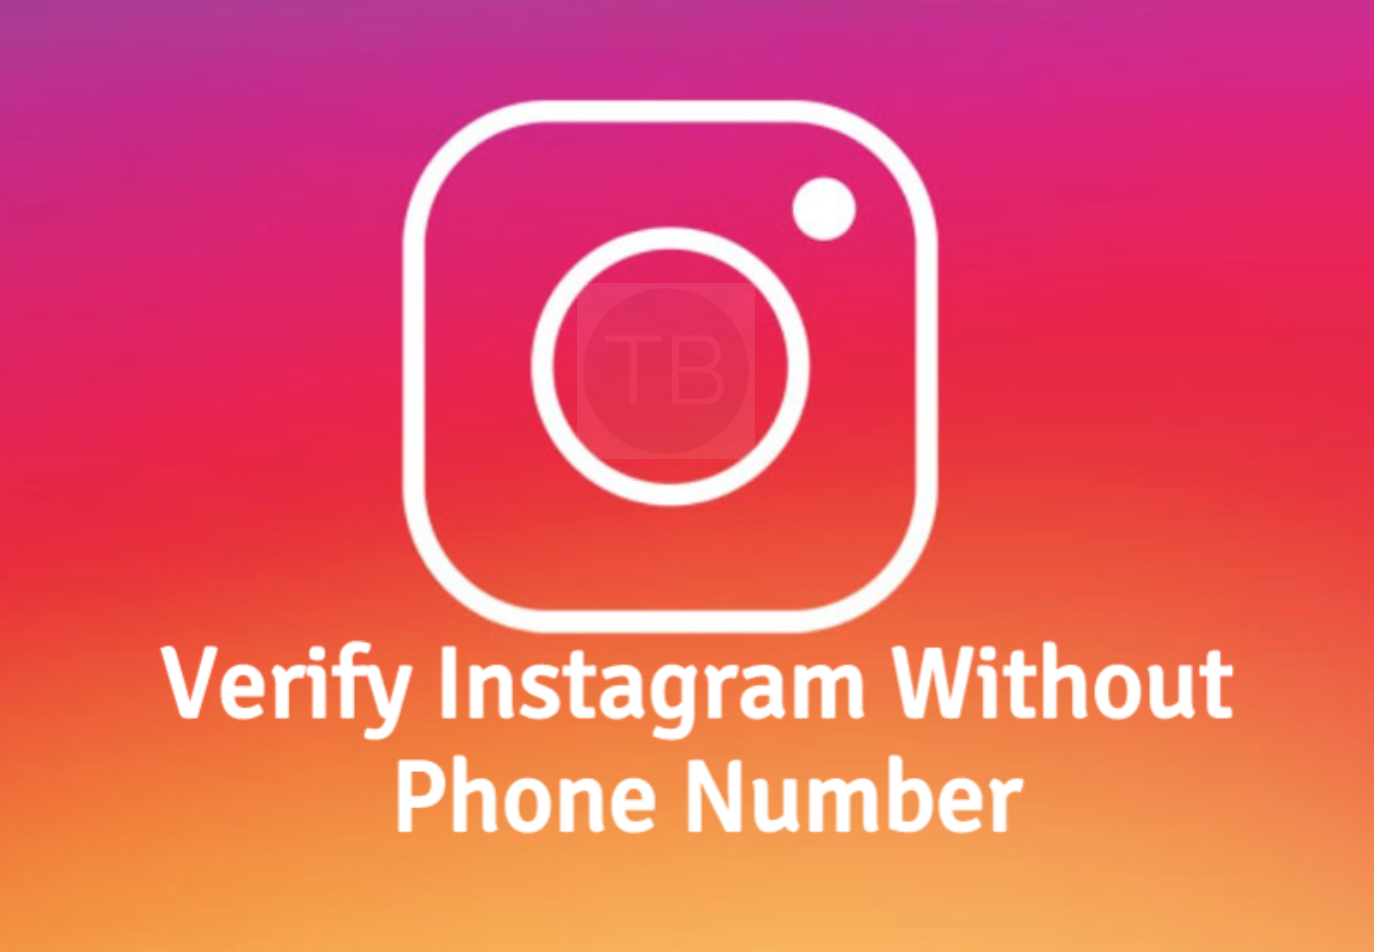 Verify Instagram Without Phone Number [ Bypass Phone Verification ] - TechBeasts